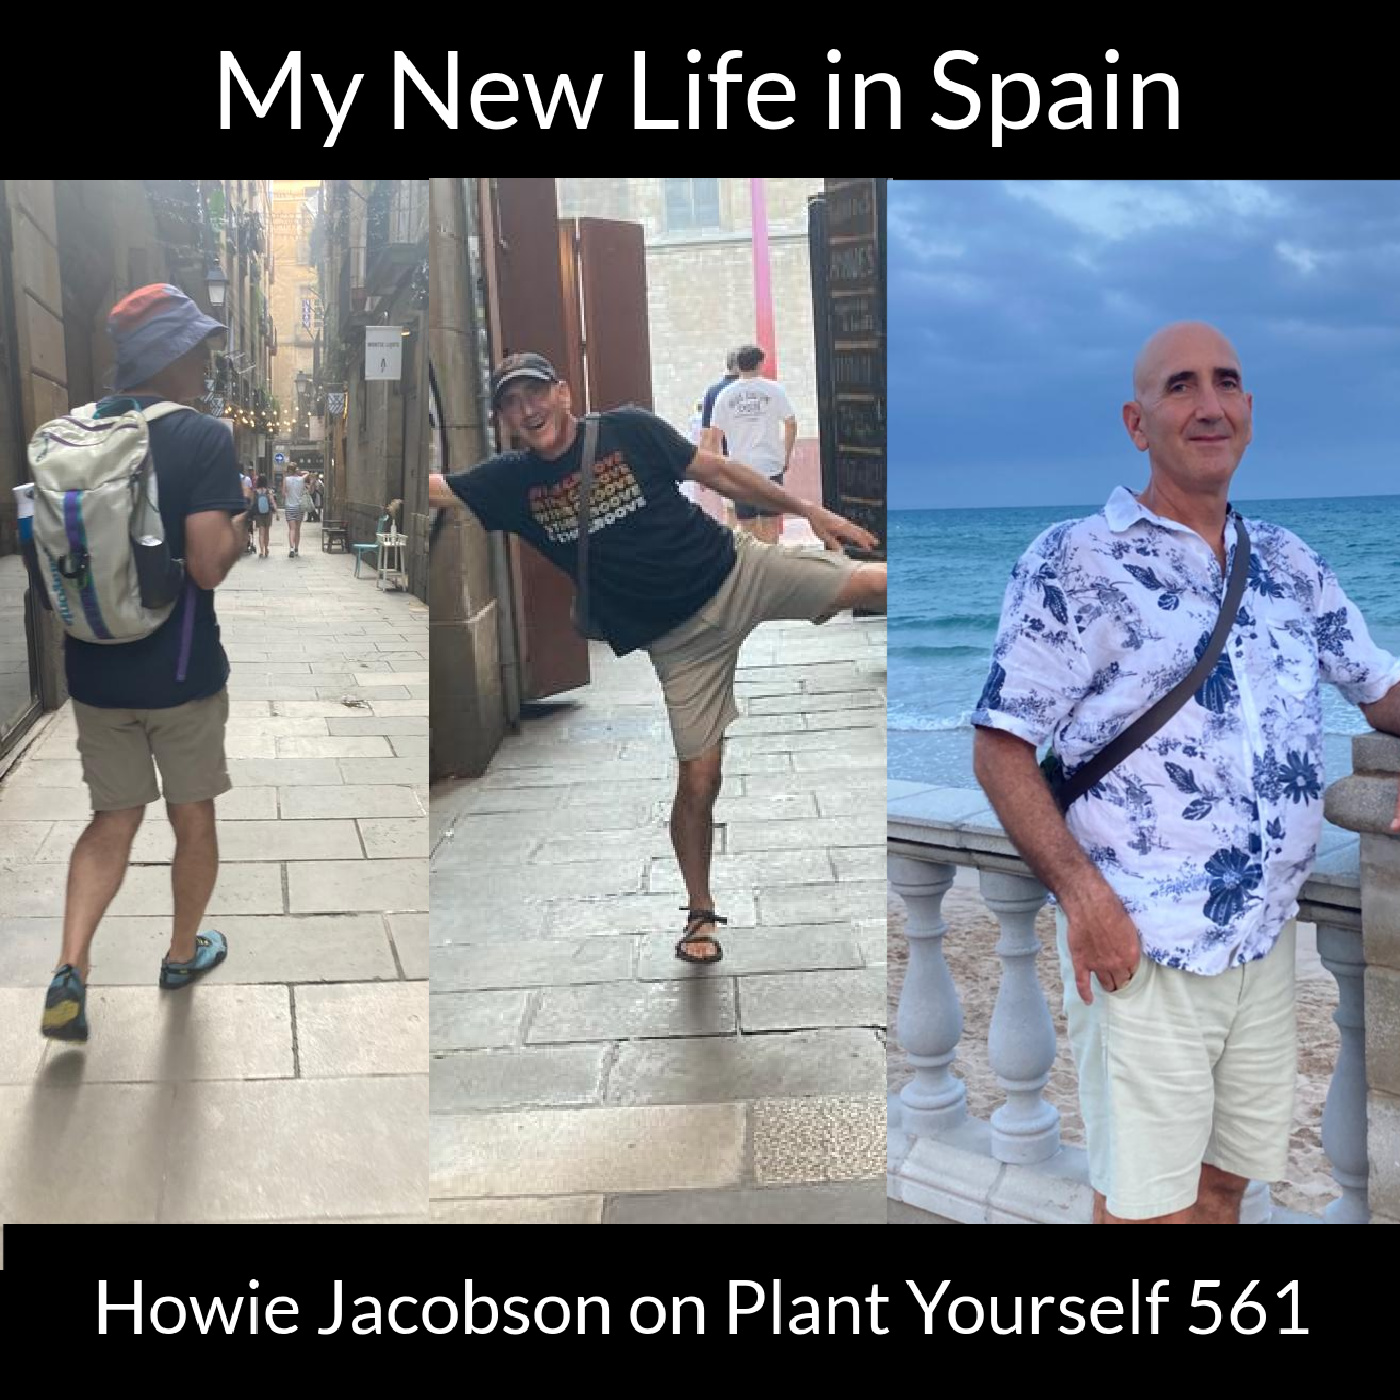 Introduction to My New Life in Spain